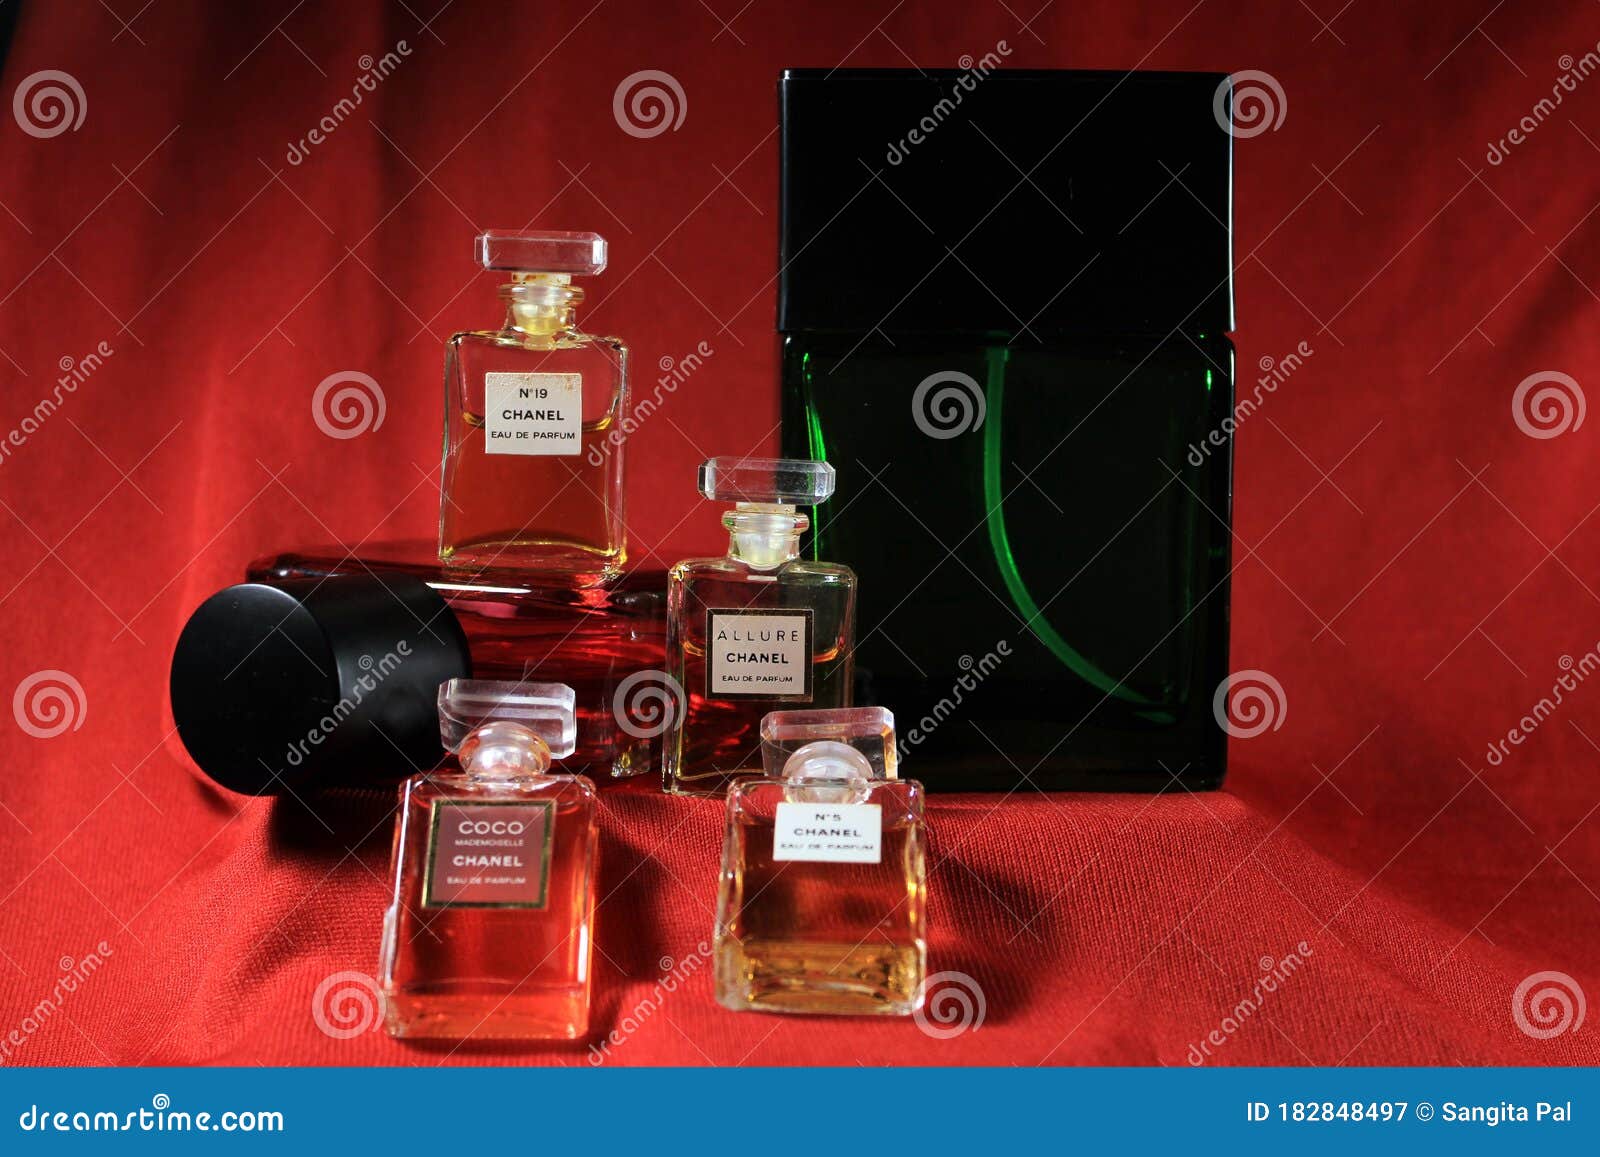 Chanel Perfume Bottles Isolated on Red Background. Bottle with Coco Chanel  & N`5 Chanel Perfume Product. Editorial Photo - Image of famous, colorful:  182848621